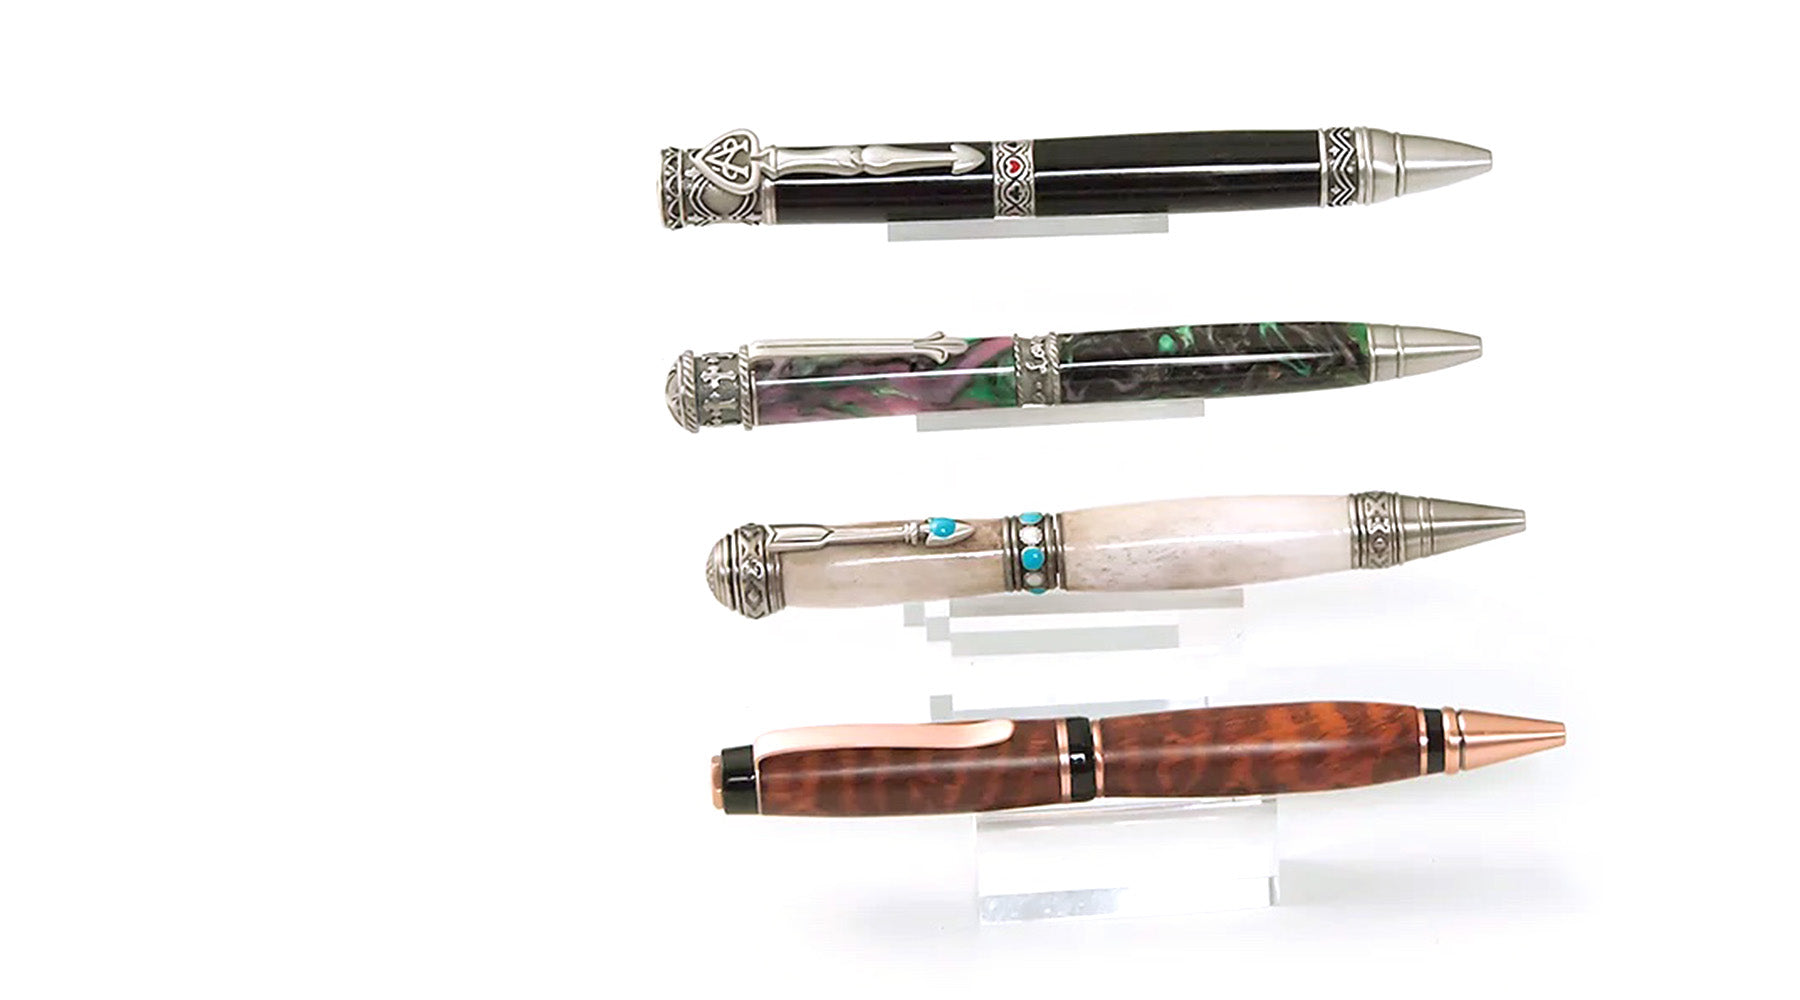 Four unique woodturned pens in various materials